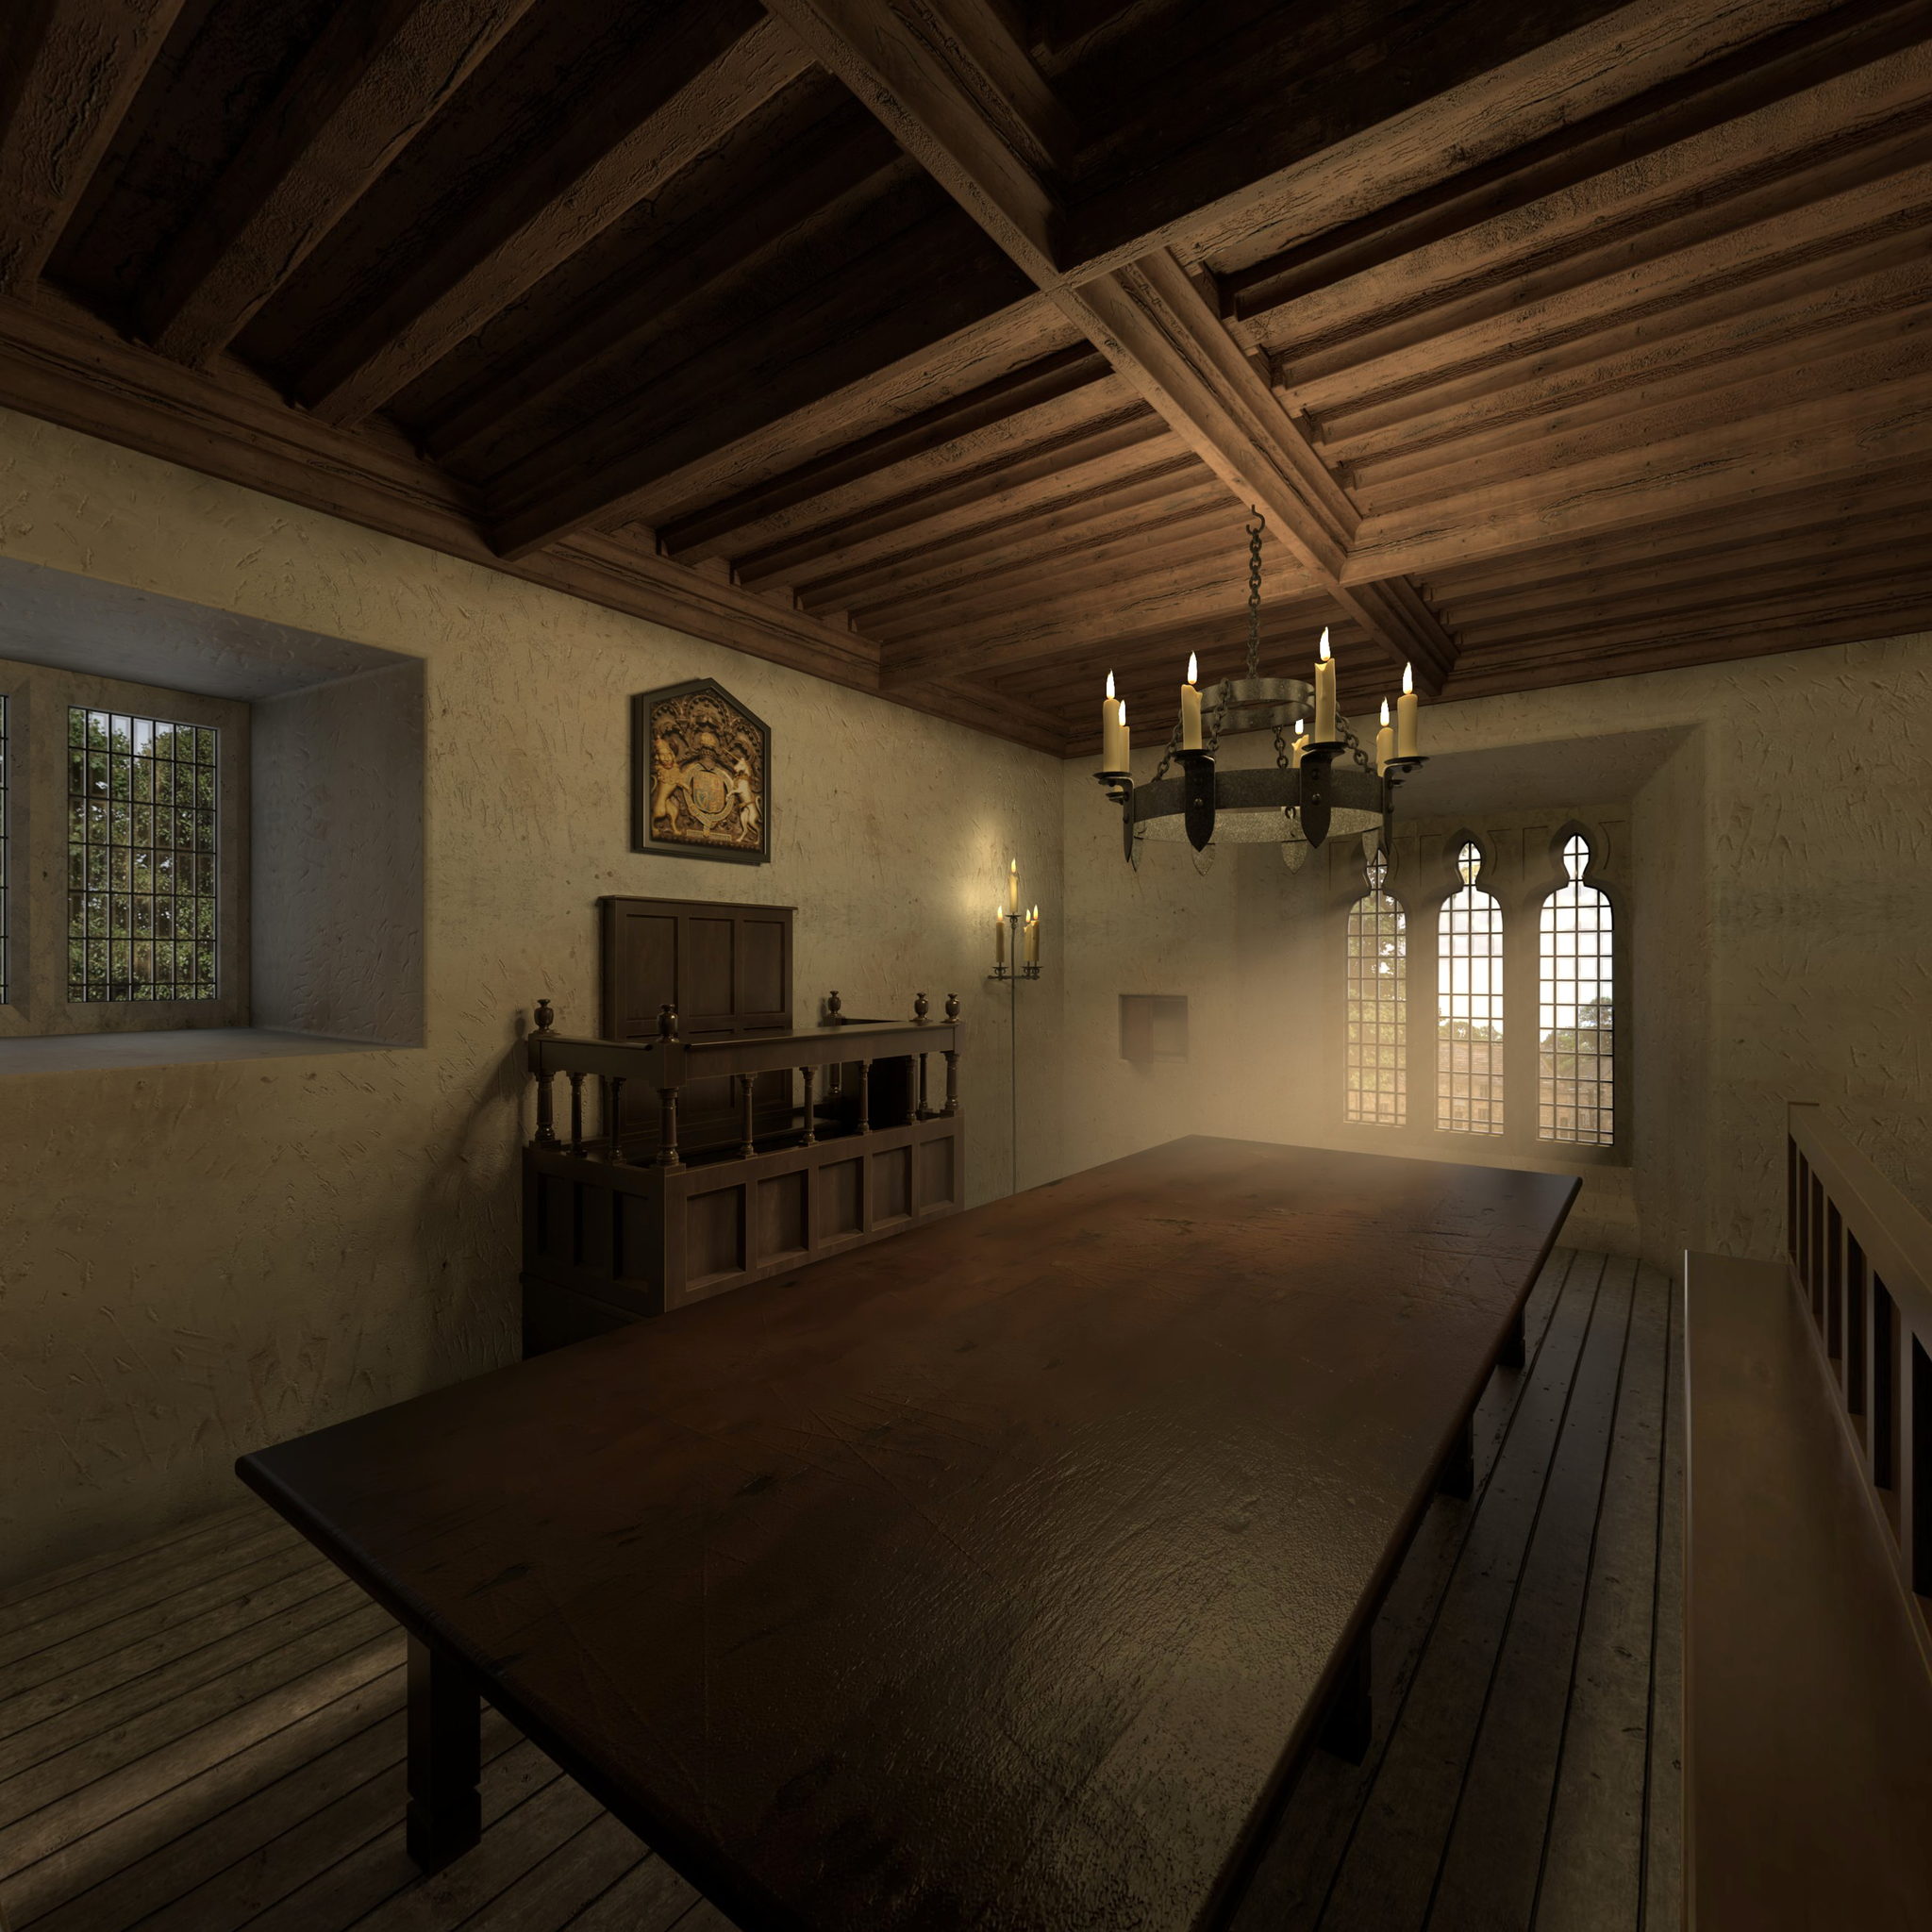 Still from the panoramic tour of the Exchequer Building. The tour shows the layout of the Chancery Court (currently housing the Bamburgh Library).